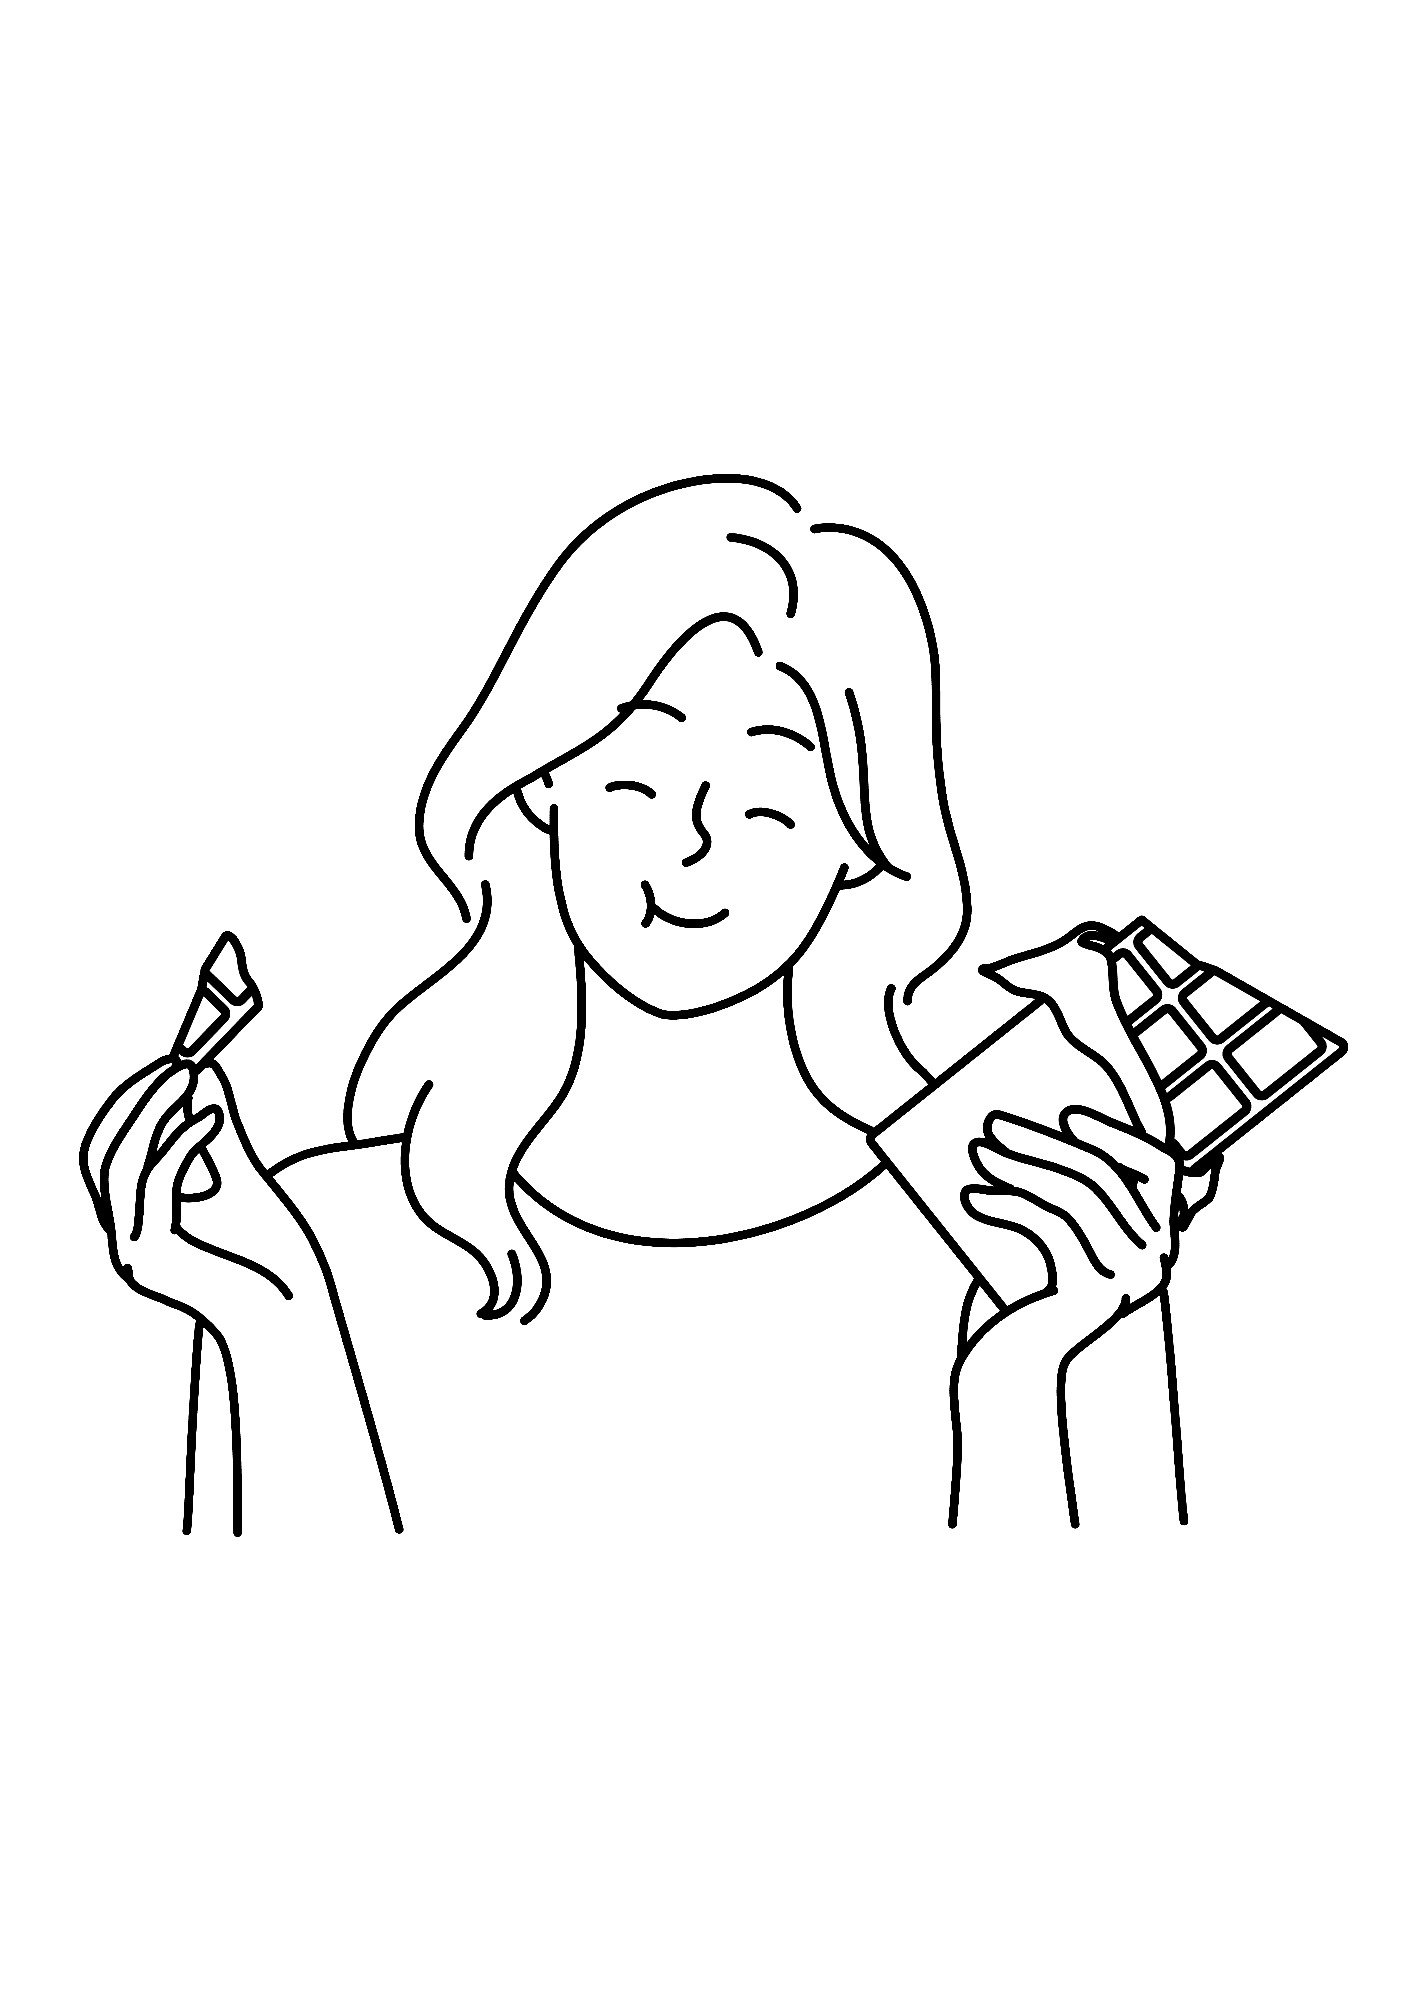 Girl Eat Chocolate Coloring Page